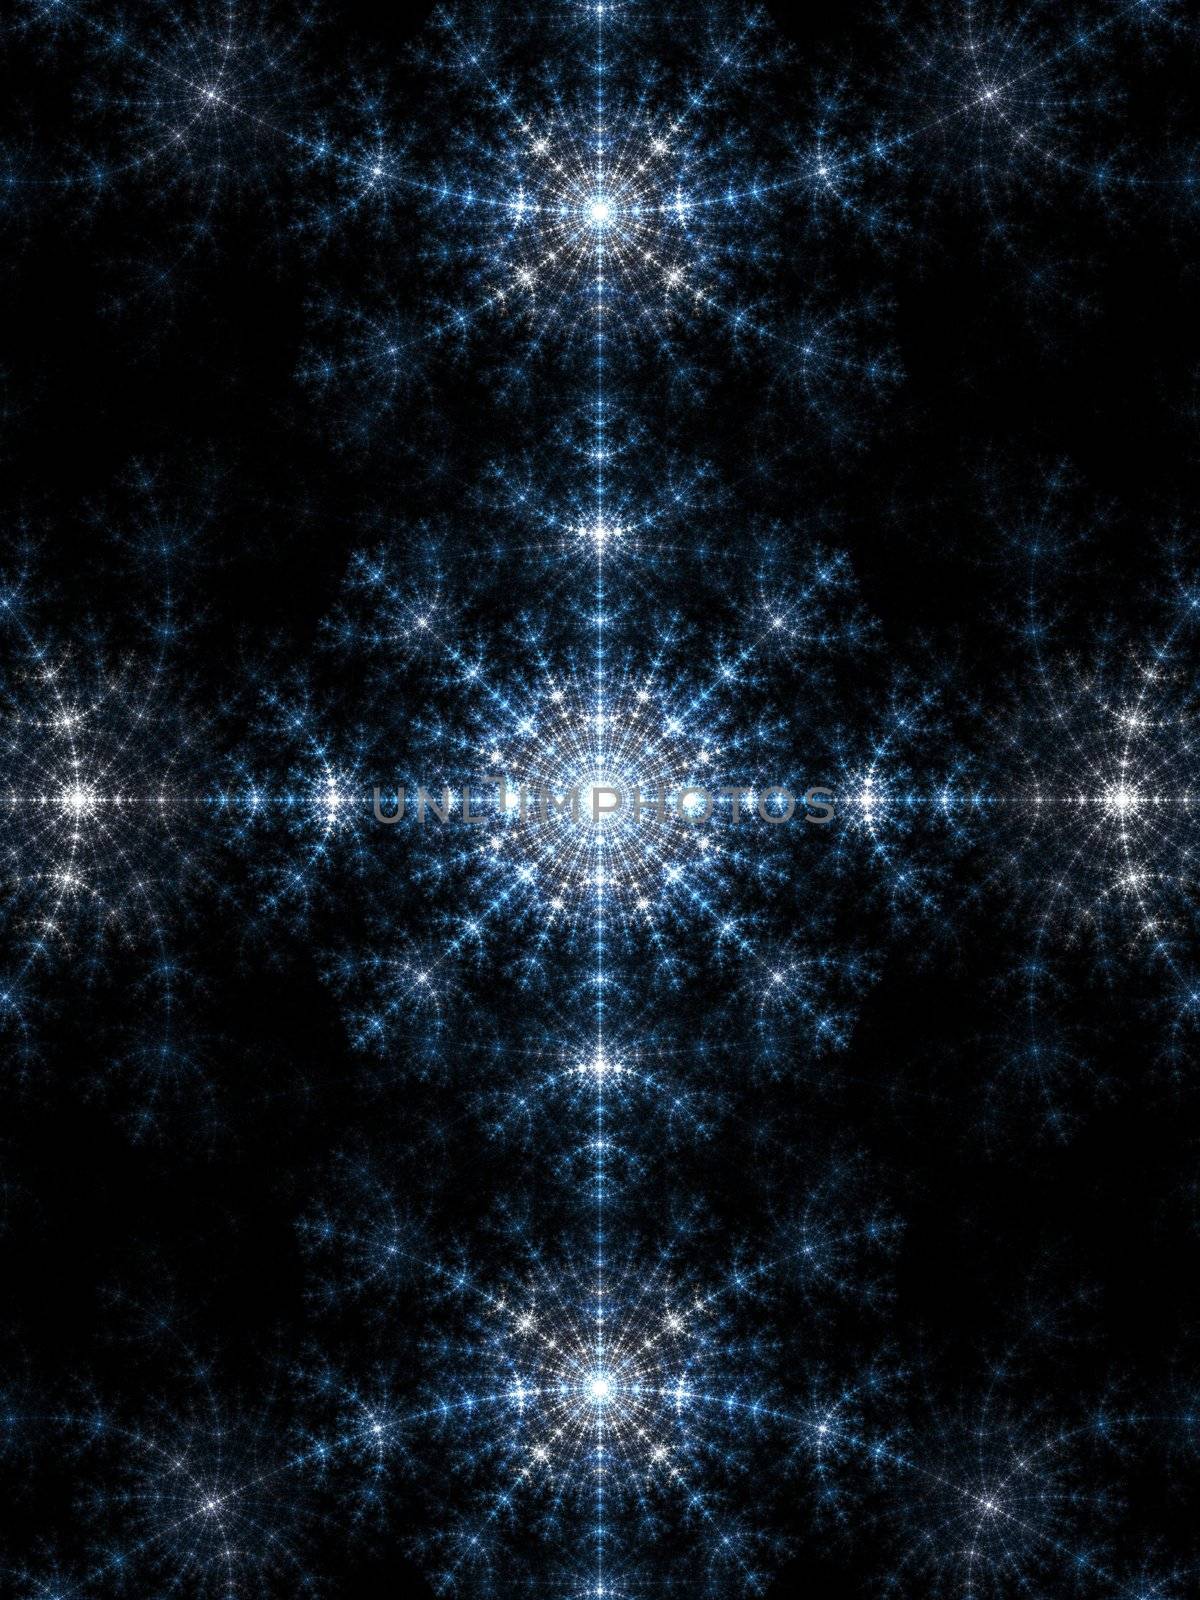 Abstract fractal background. Computer generated graphics. Snow flakes texture.